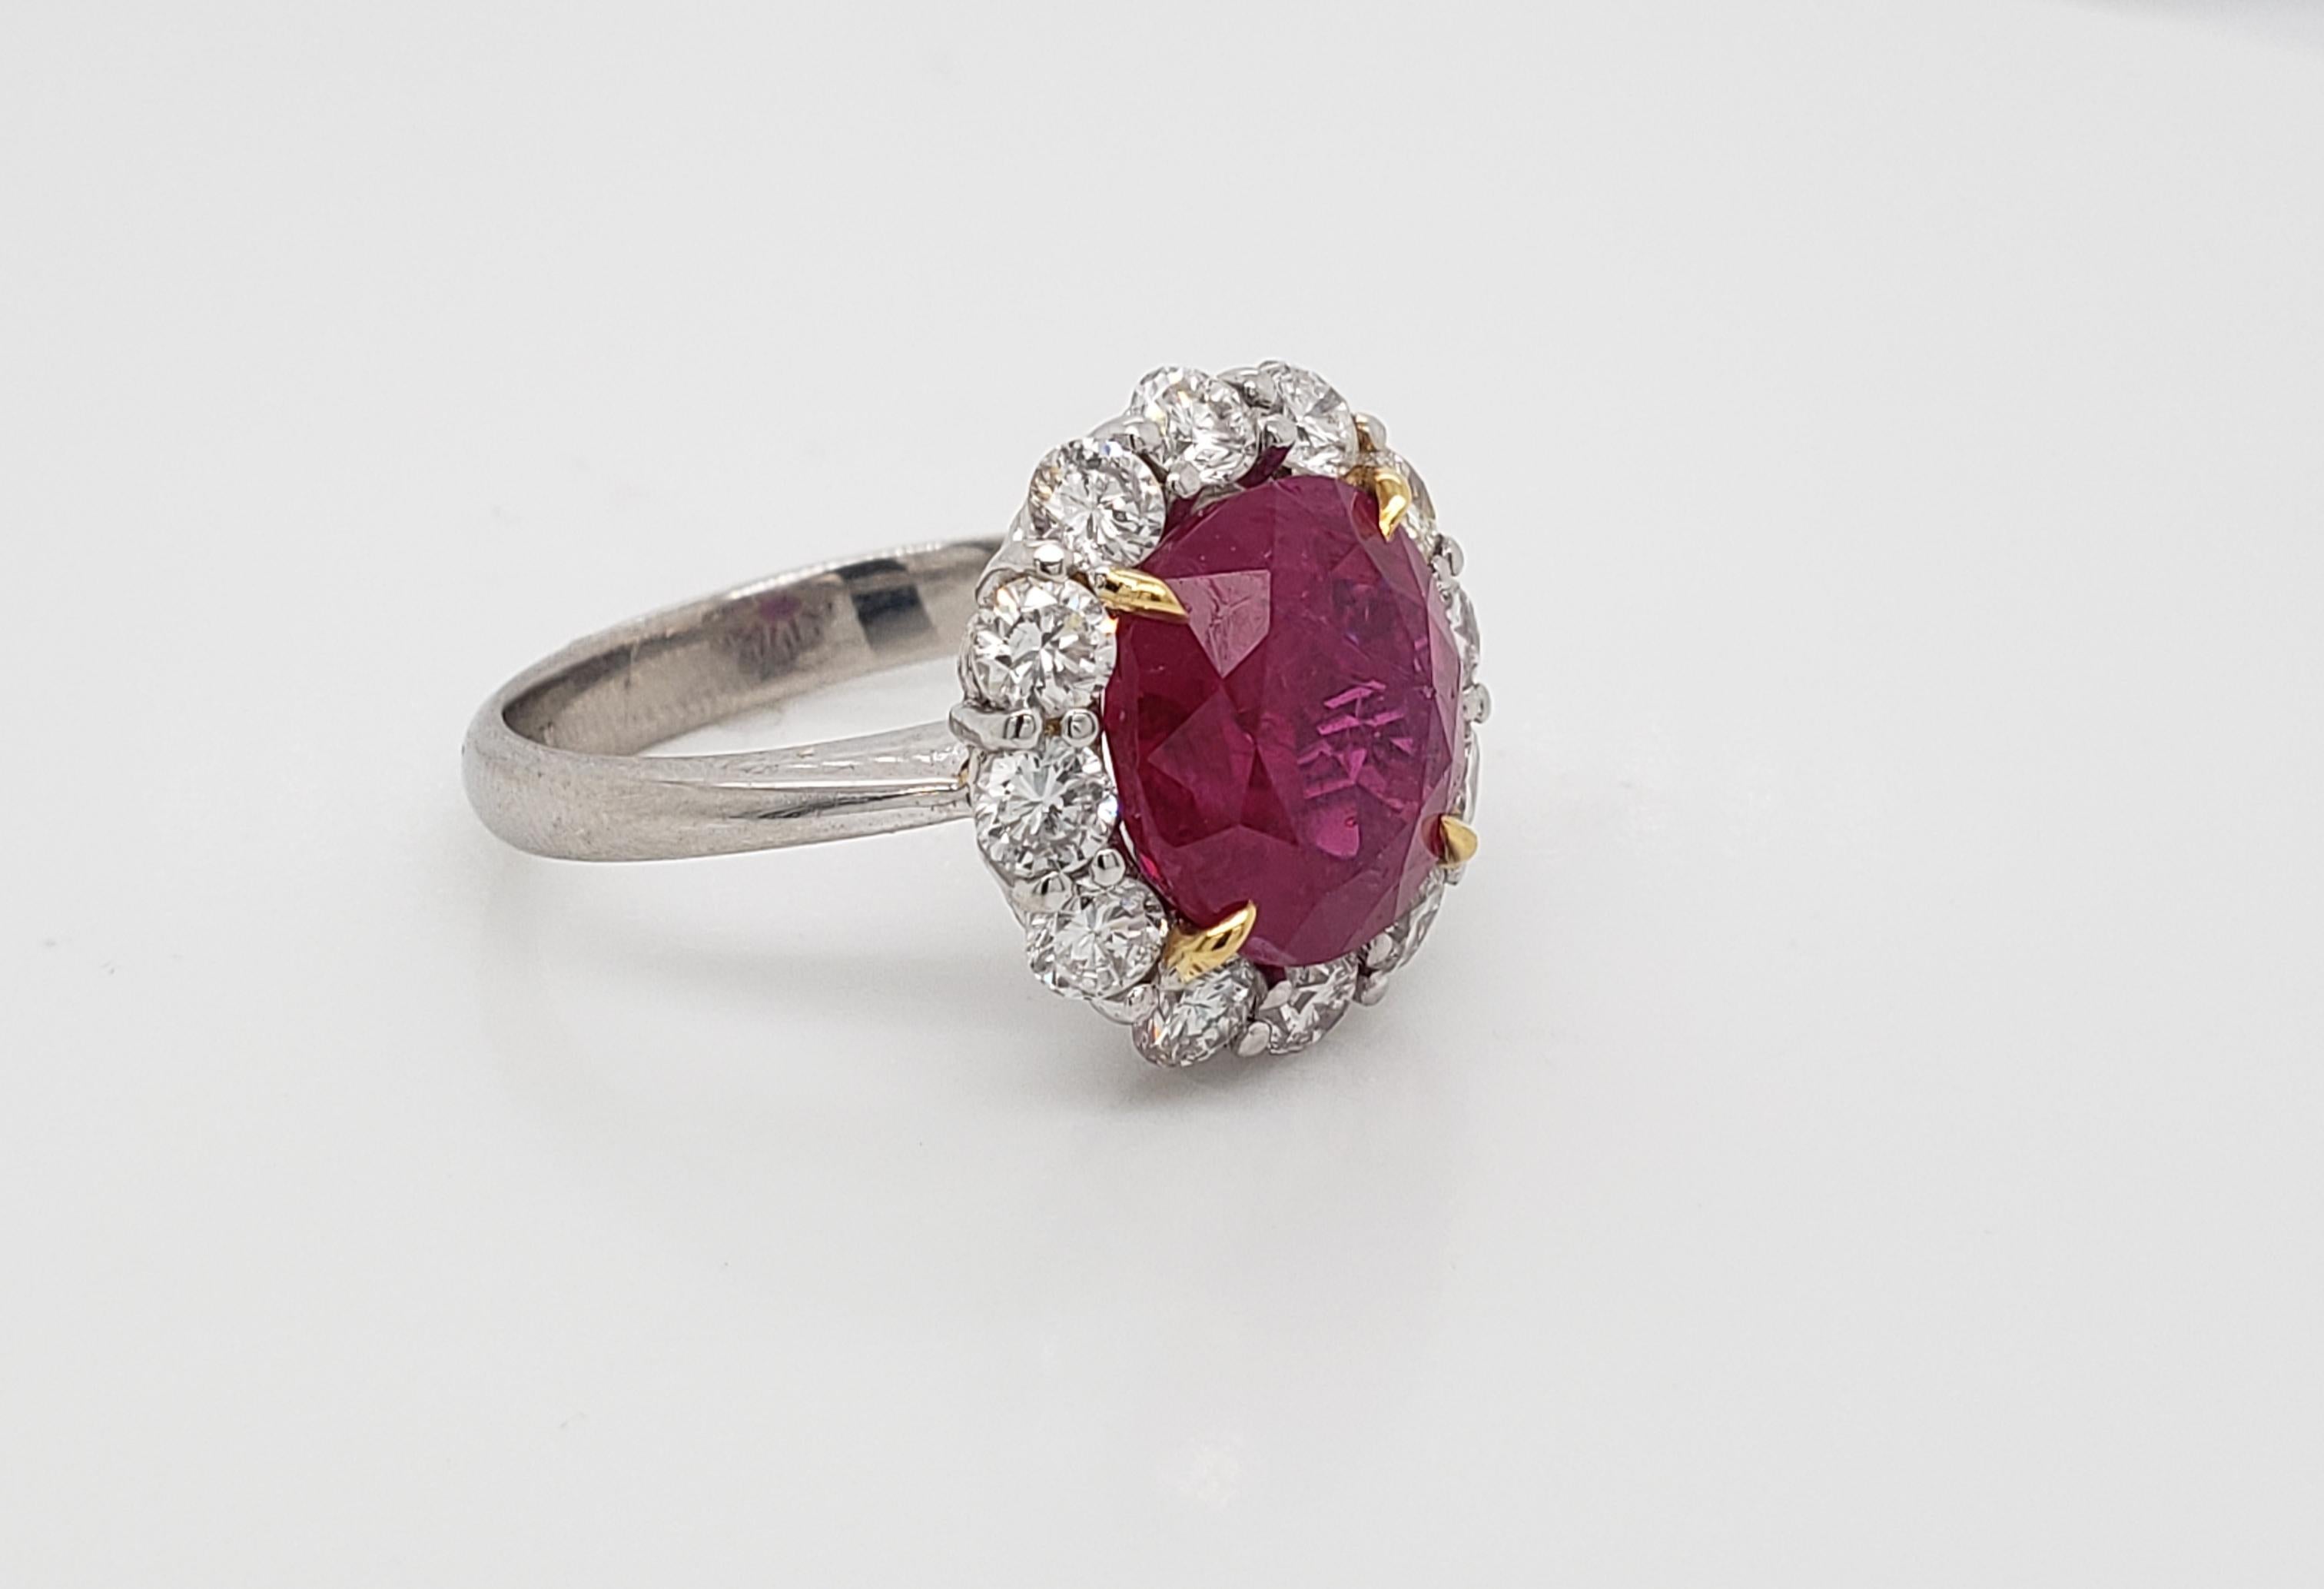 Ruby and Diamond Ring.

AGL Certified Oval-shaped Burma Ruby weighing 5.25 carats flanked by twelve brilliant-cut diamonds weighing a total of 1.20 carats, hand-crafted in platinum. (Sizable)

Classic, elegant item for anyone's collection!

